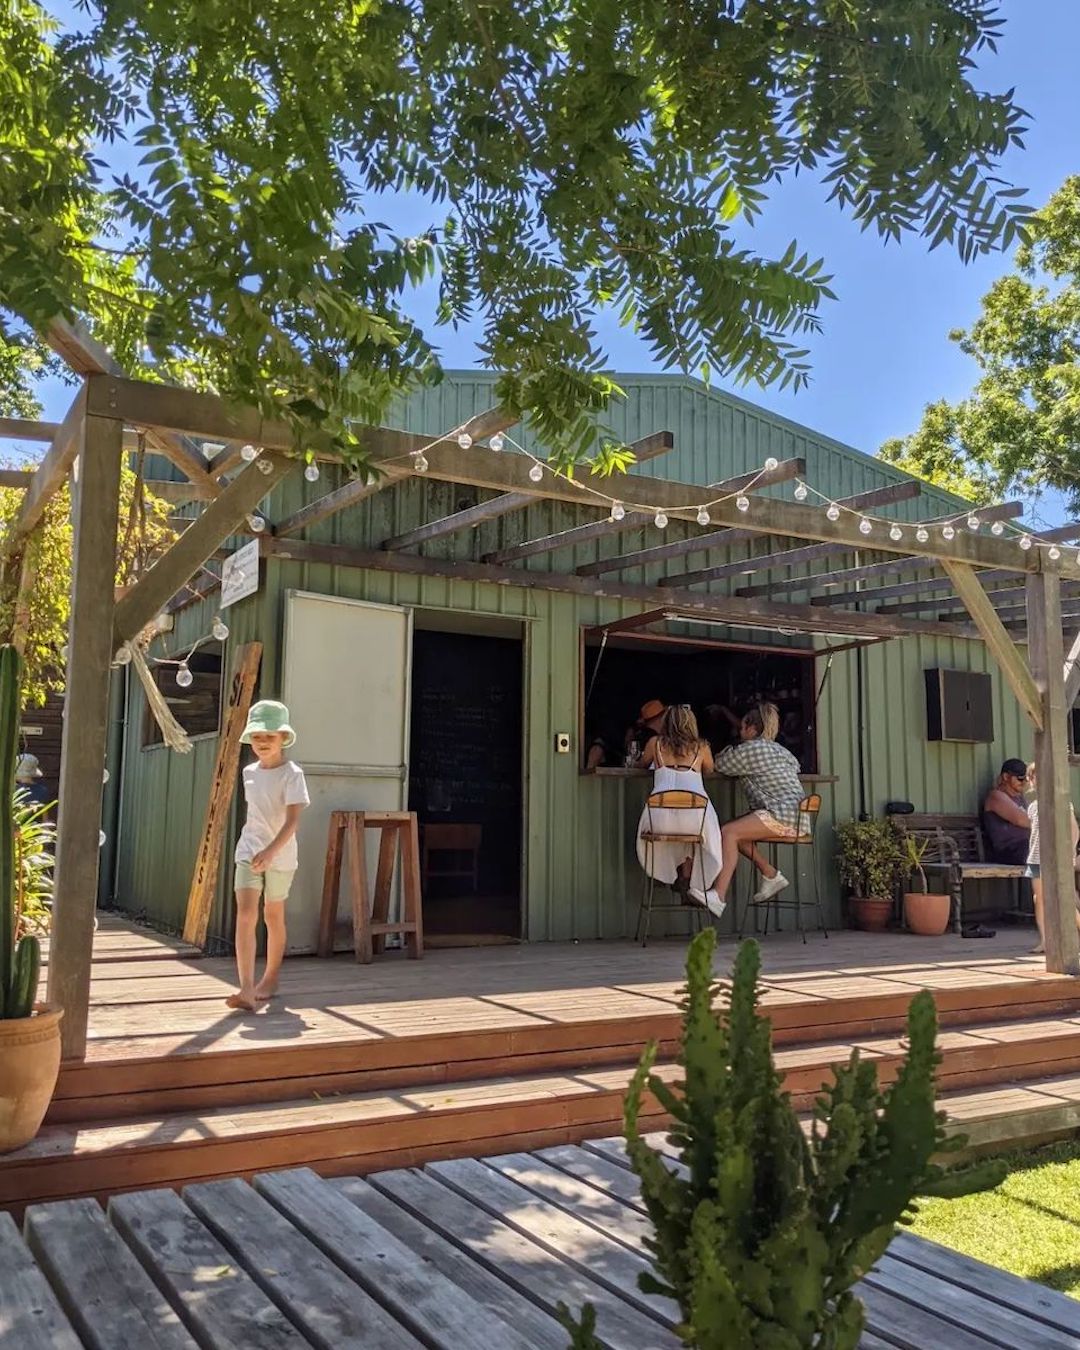 The breezy and green outdoor deck at Si Vinters winery in Margaret River